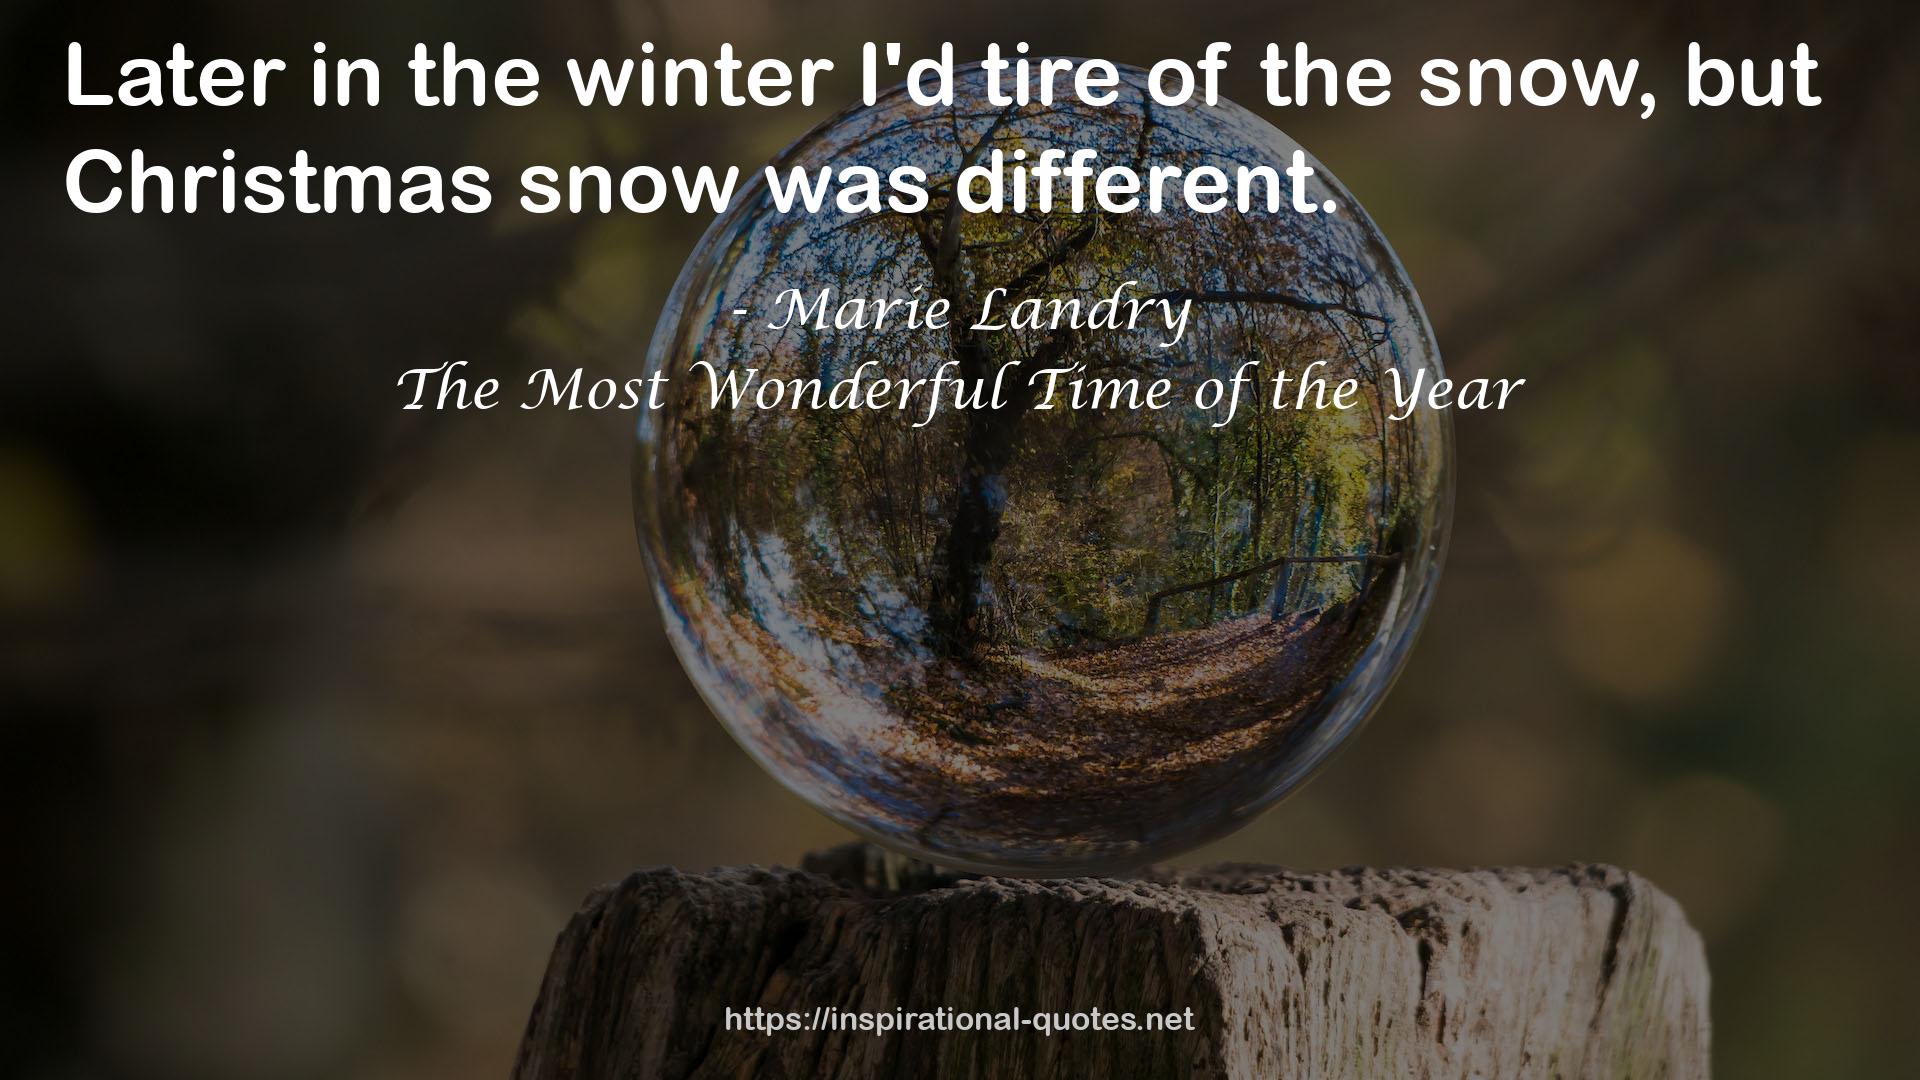 The Most Wonderful Time of the Year QUOTES